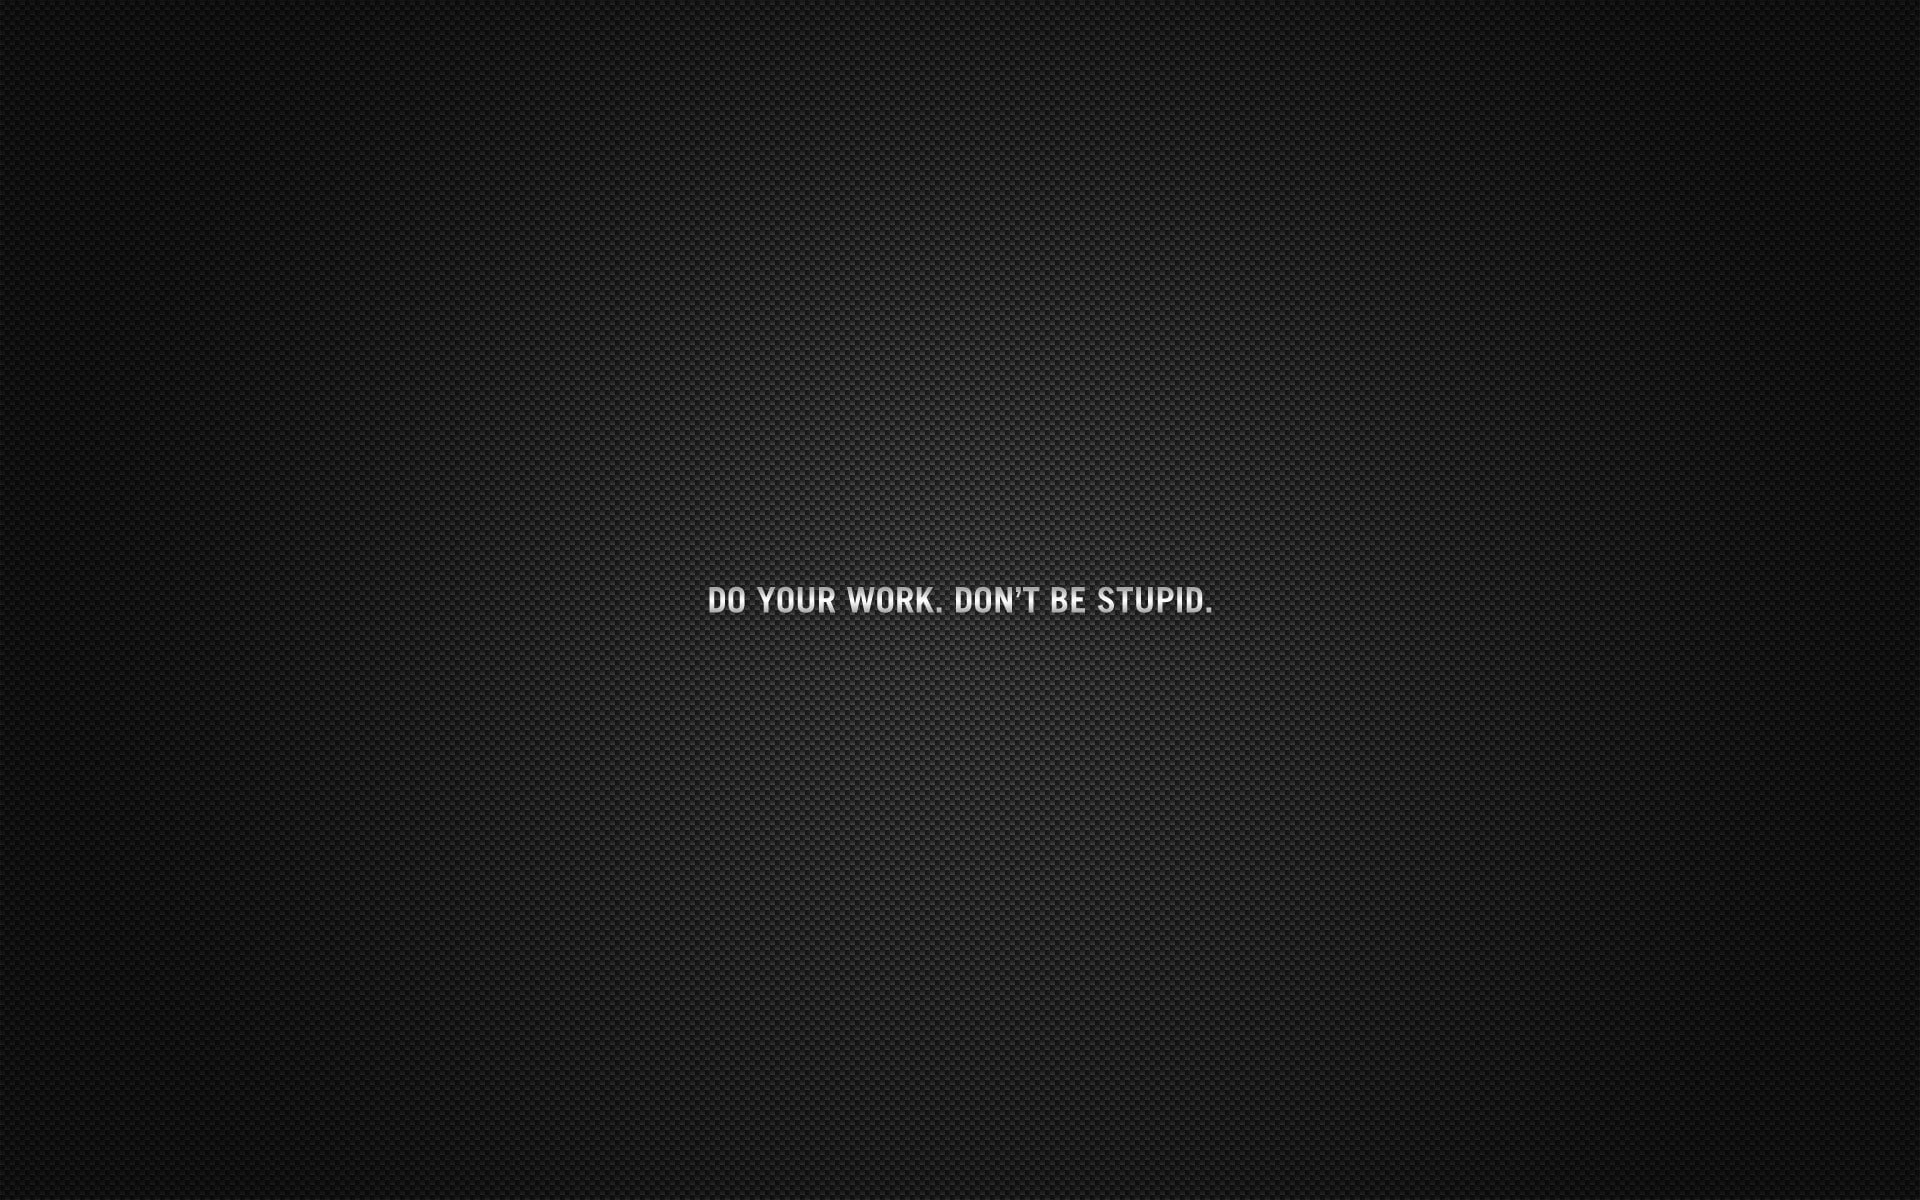 Do your work don't be stupid wallpaper, quote, motivational, minimalism, typography